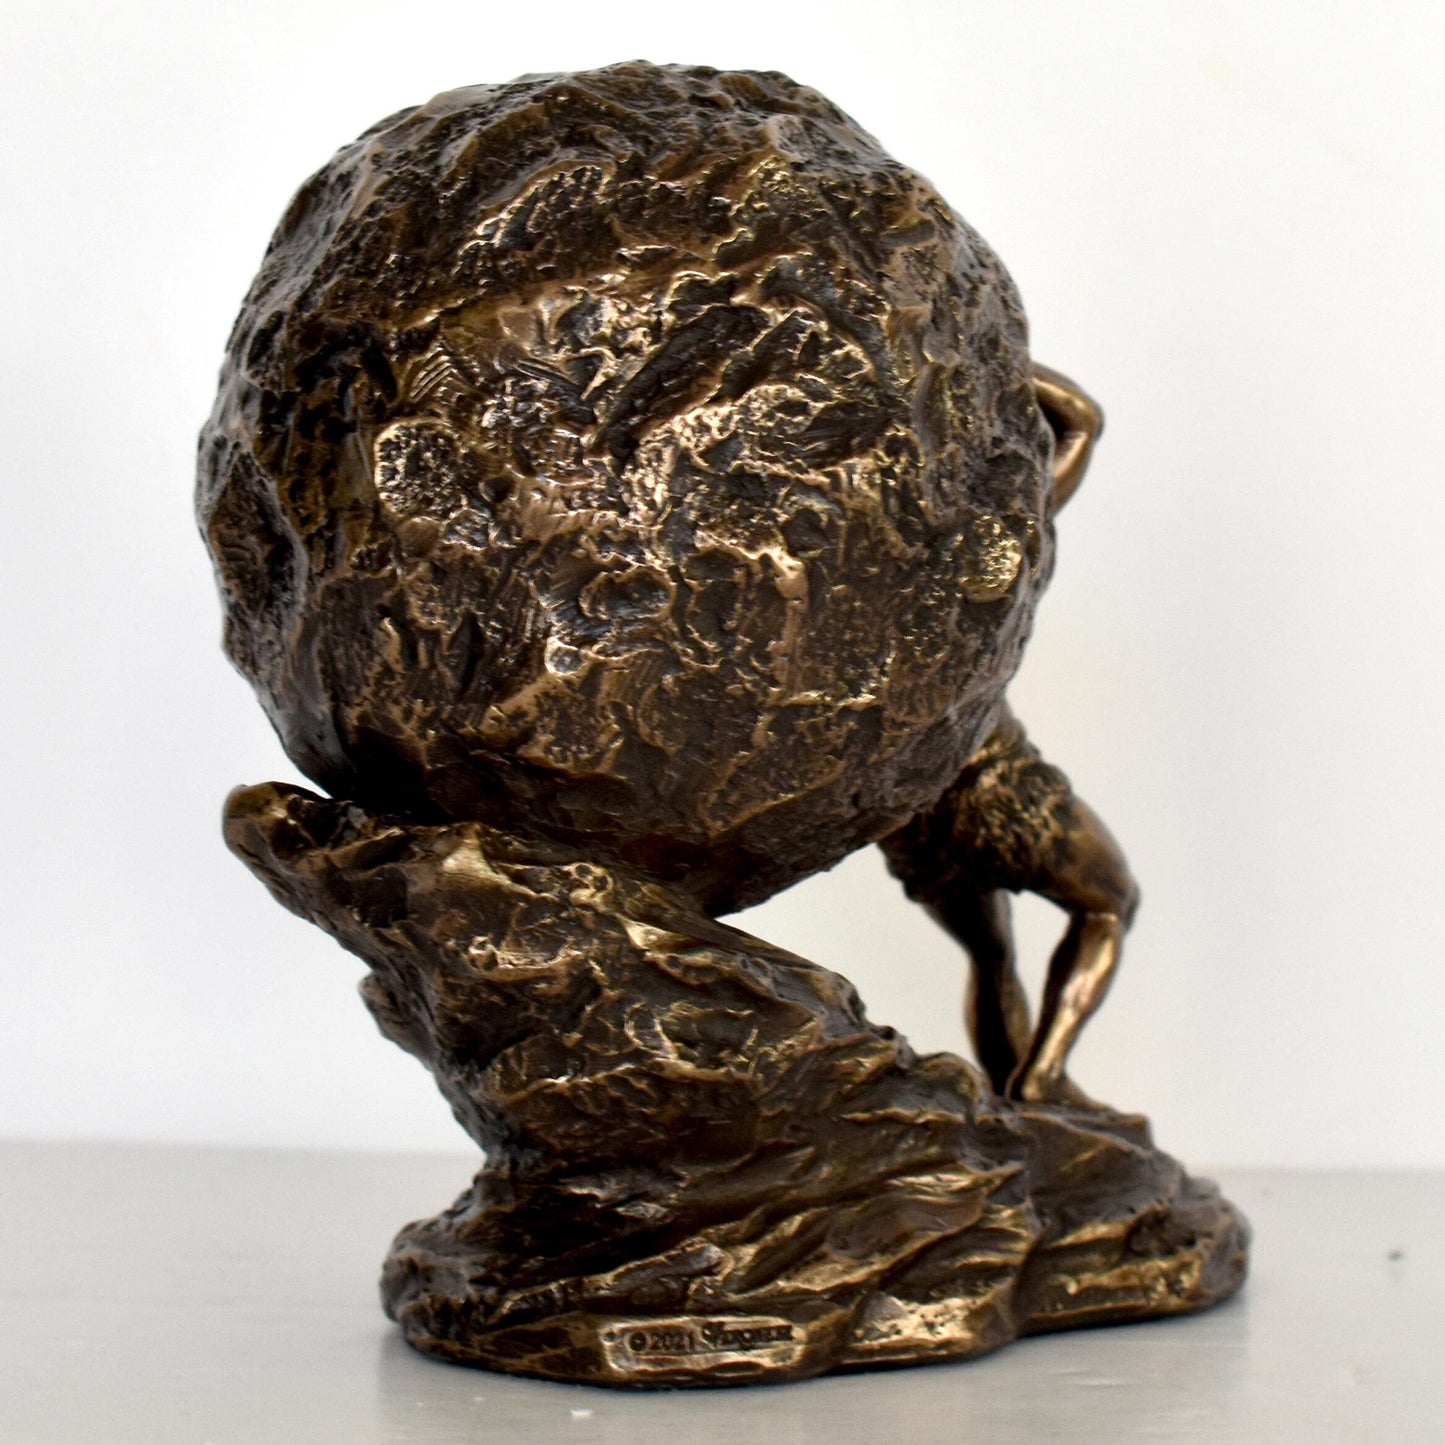 Sisyphus Sisyphos - Hades punished him  to roll a boulder up a hill and to roll down every time it neared the top - Cold Cast Bronze Resin